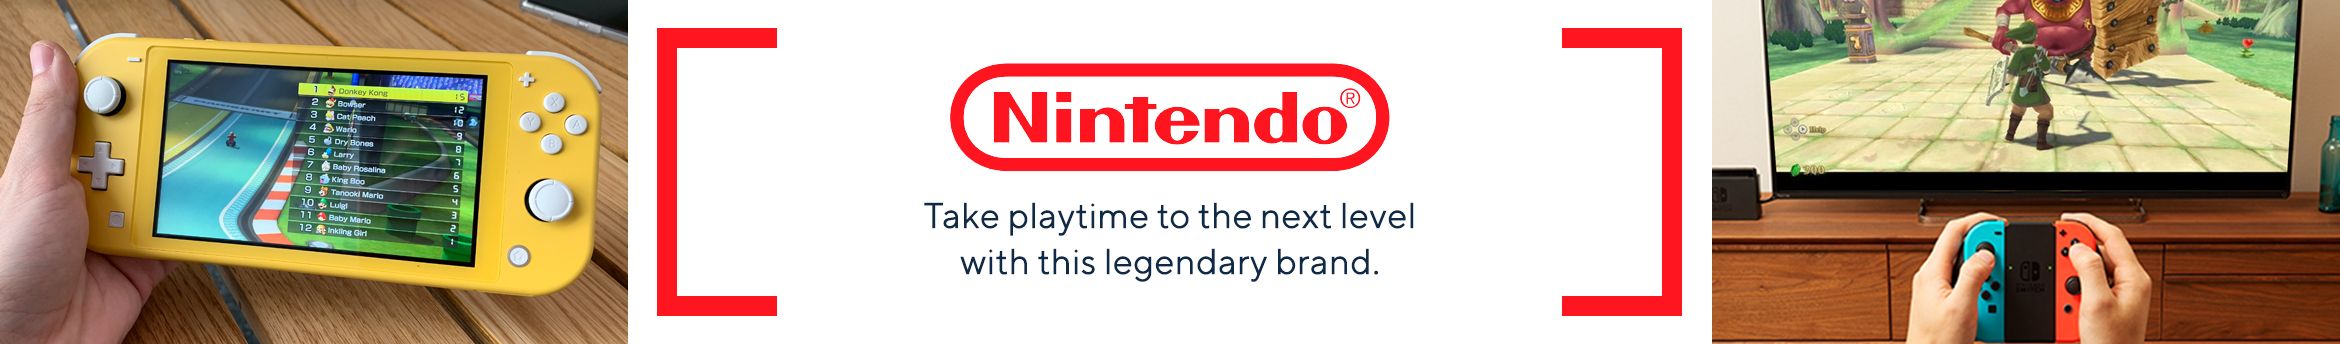 Nintendo.  Take playtime to the next level with this legendary brand.